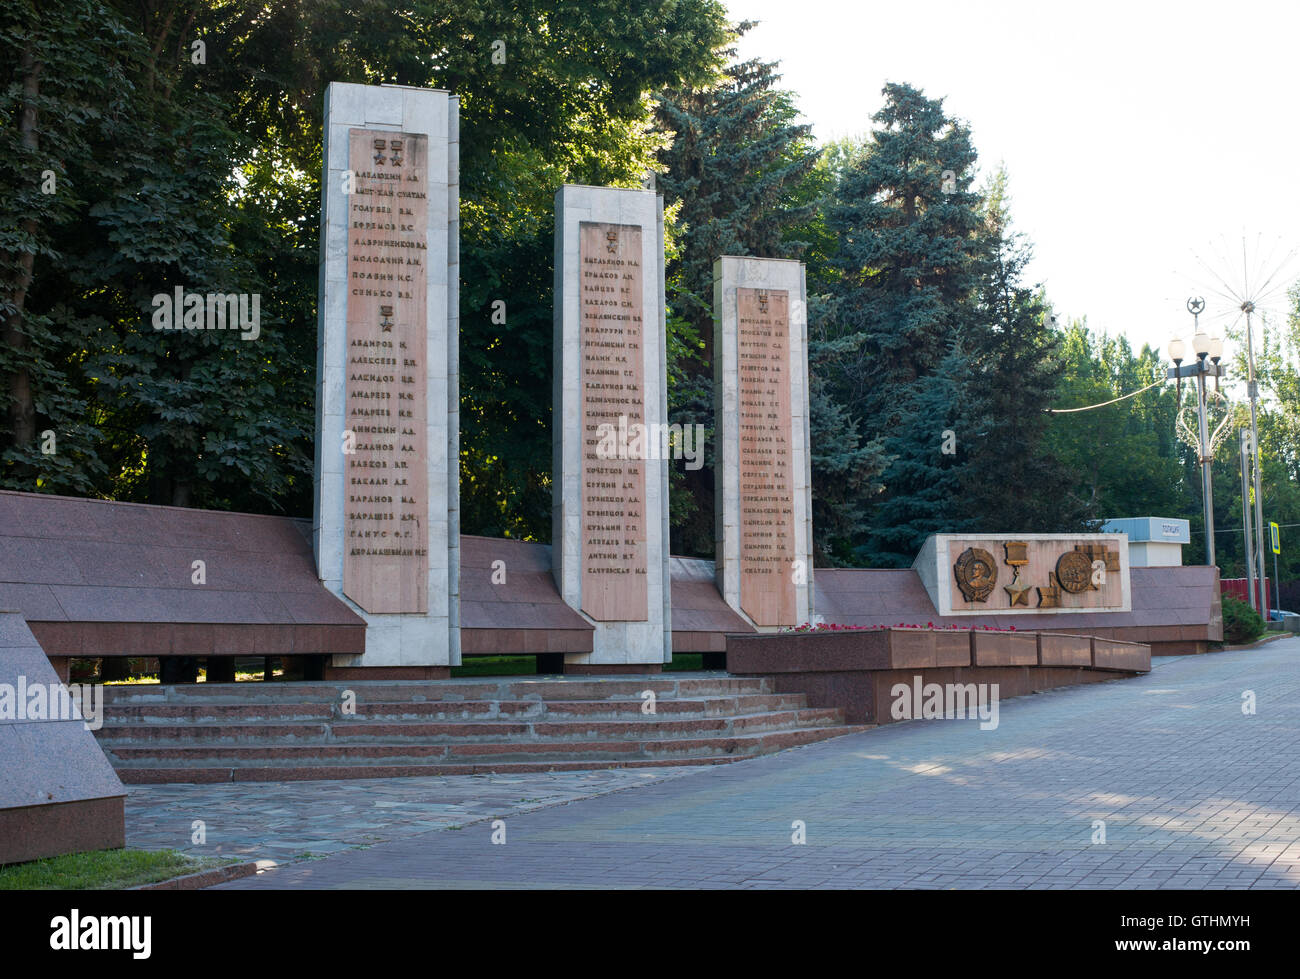 The Alley of Heroes . A monument to 127 heroes of the Soviet Union during Stalingrad Battle in WW2 Stock Photo